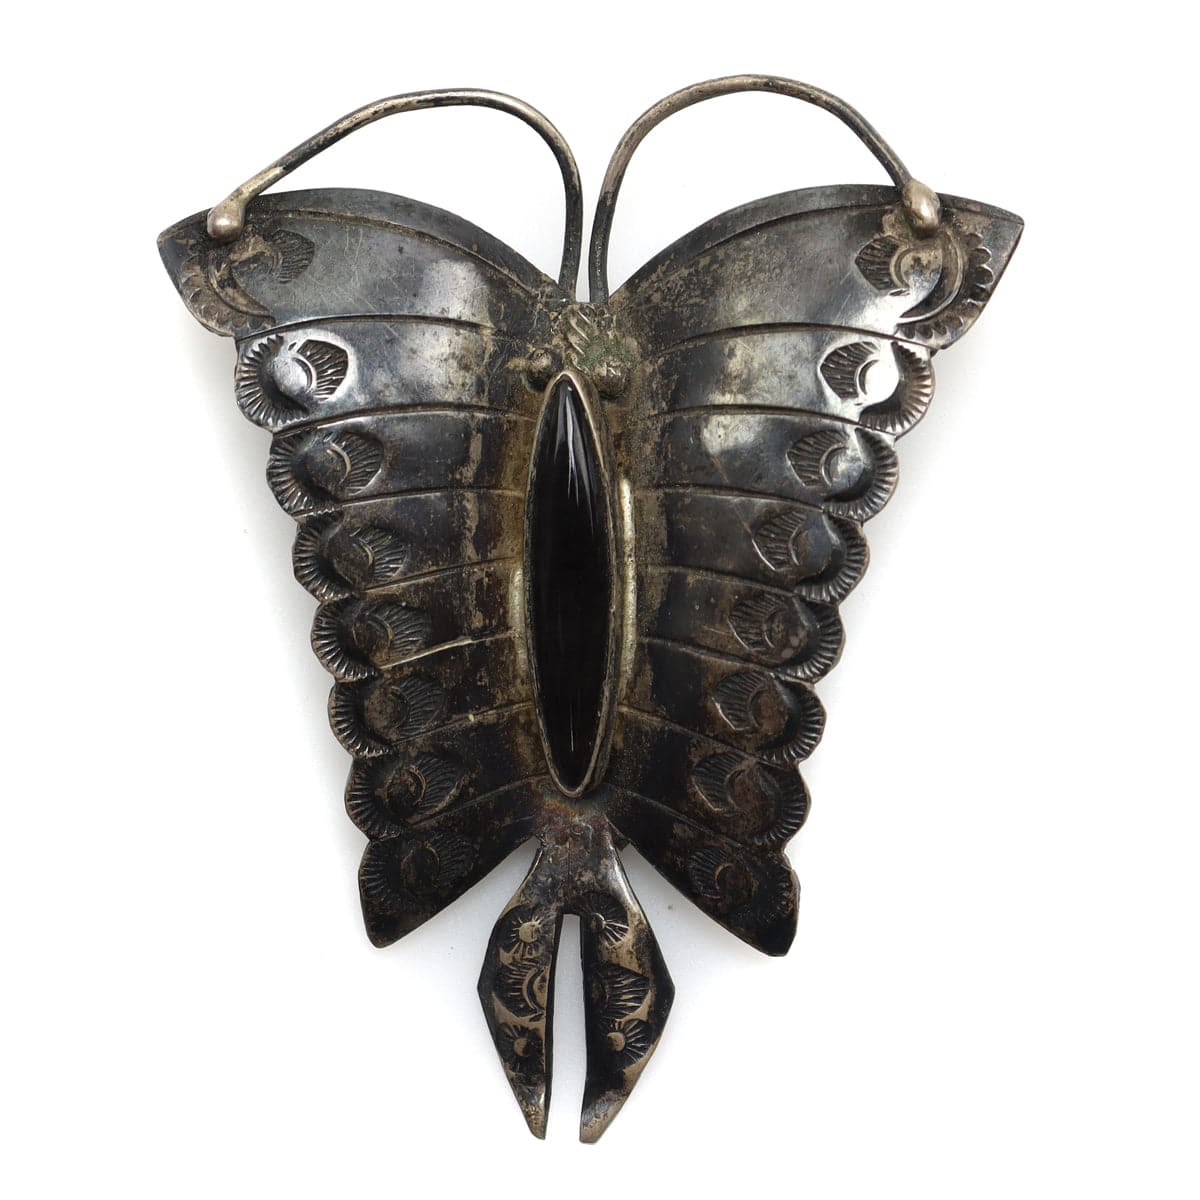 Navajo Onyx and Silver Butterfly Pin with Stamped Design c. 1930-40s, 2.25" x 2" (J13251)
